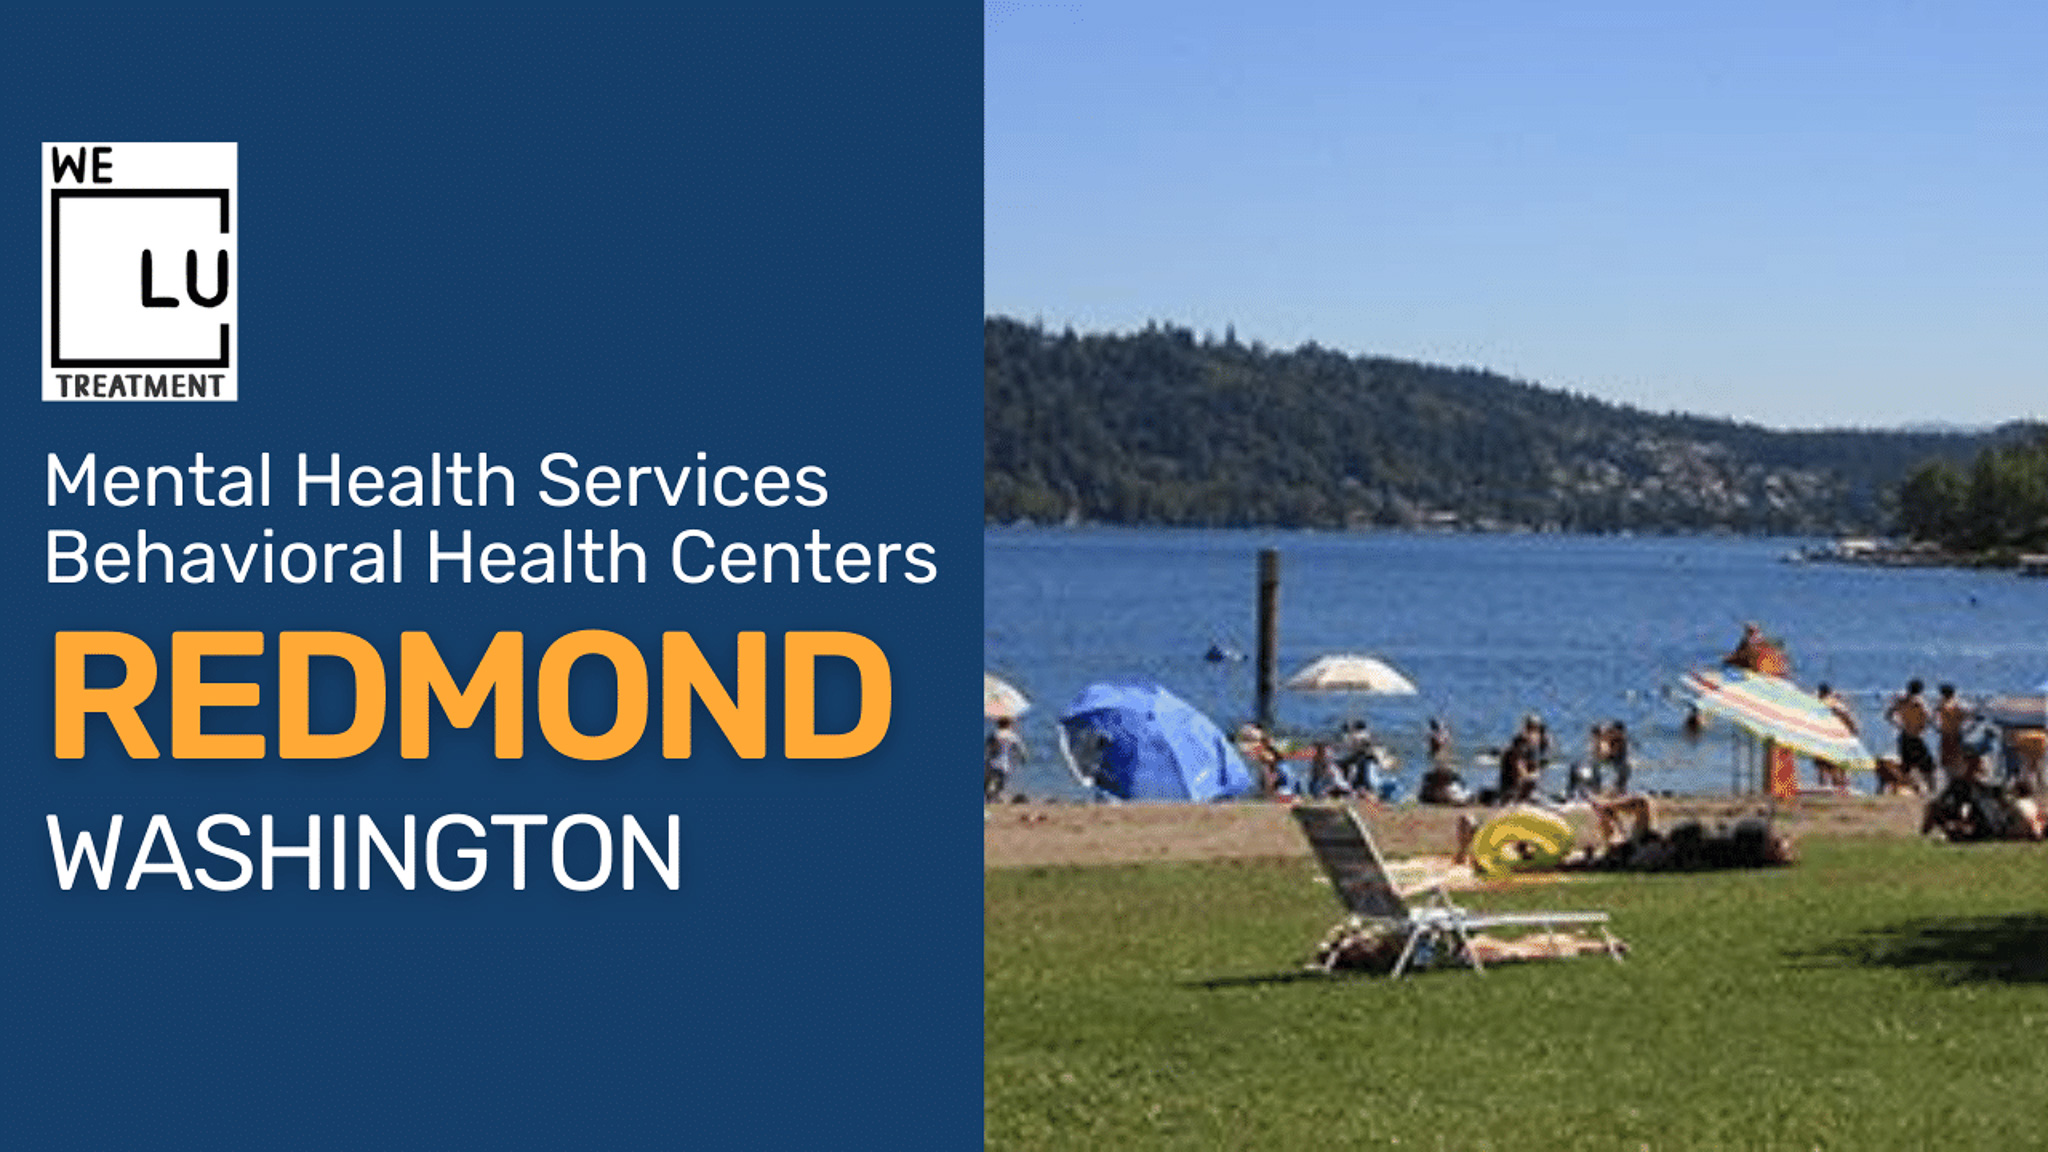 Redmond WA We Level Up treatment center for drug and alcohol rehab detox and mental health services - Image 1